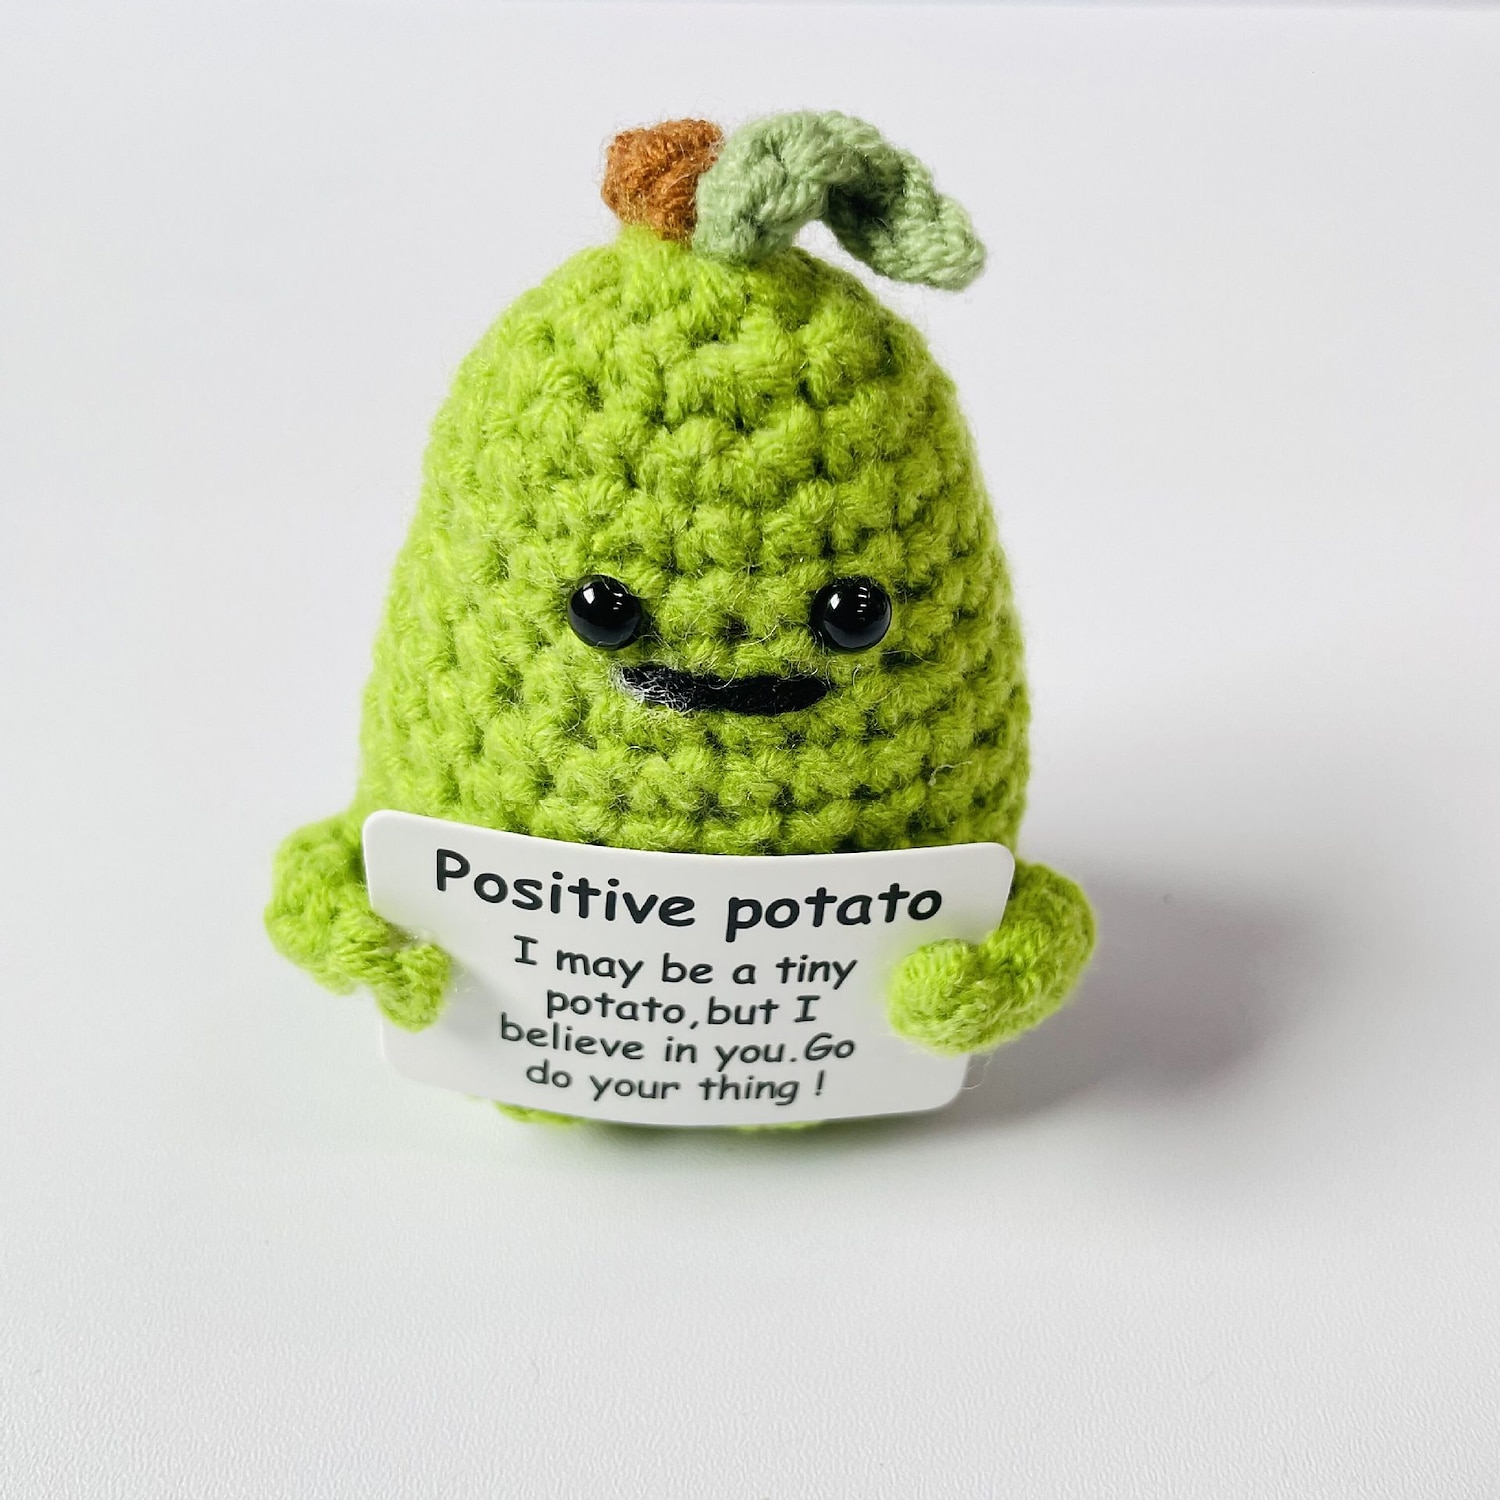 10 Styles Handmade Emotional Support Pickled  Cucumber,Crochet-Emotional-Support